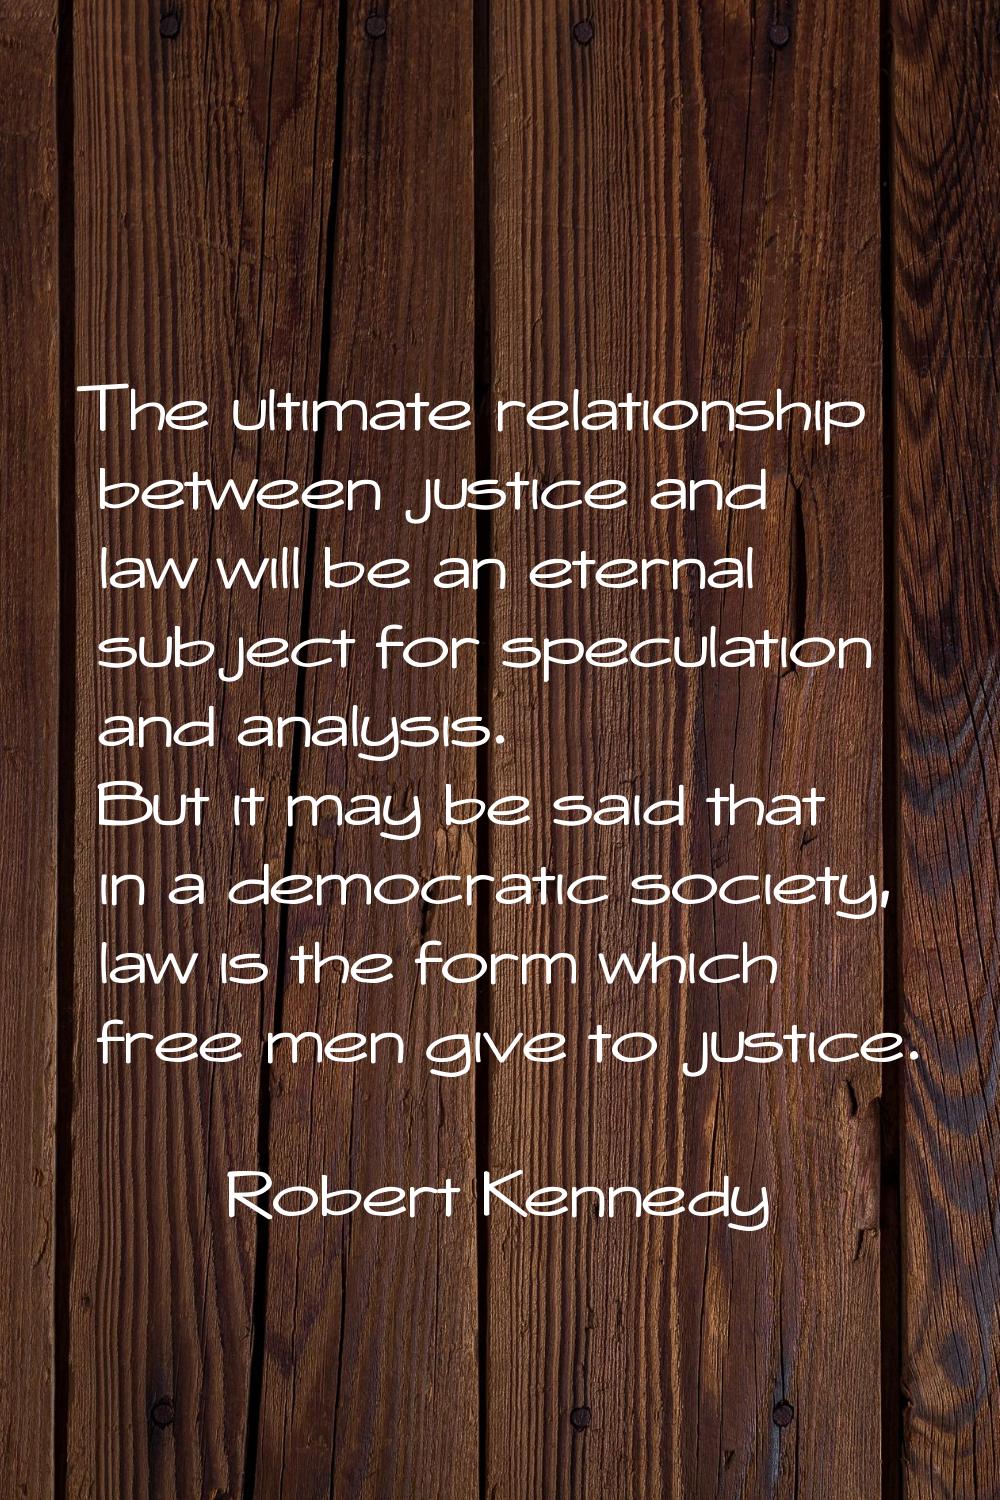 The ultimate relationship between justice and law will be an eternal subject for speculation and an